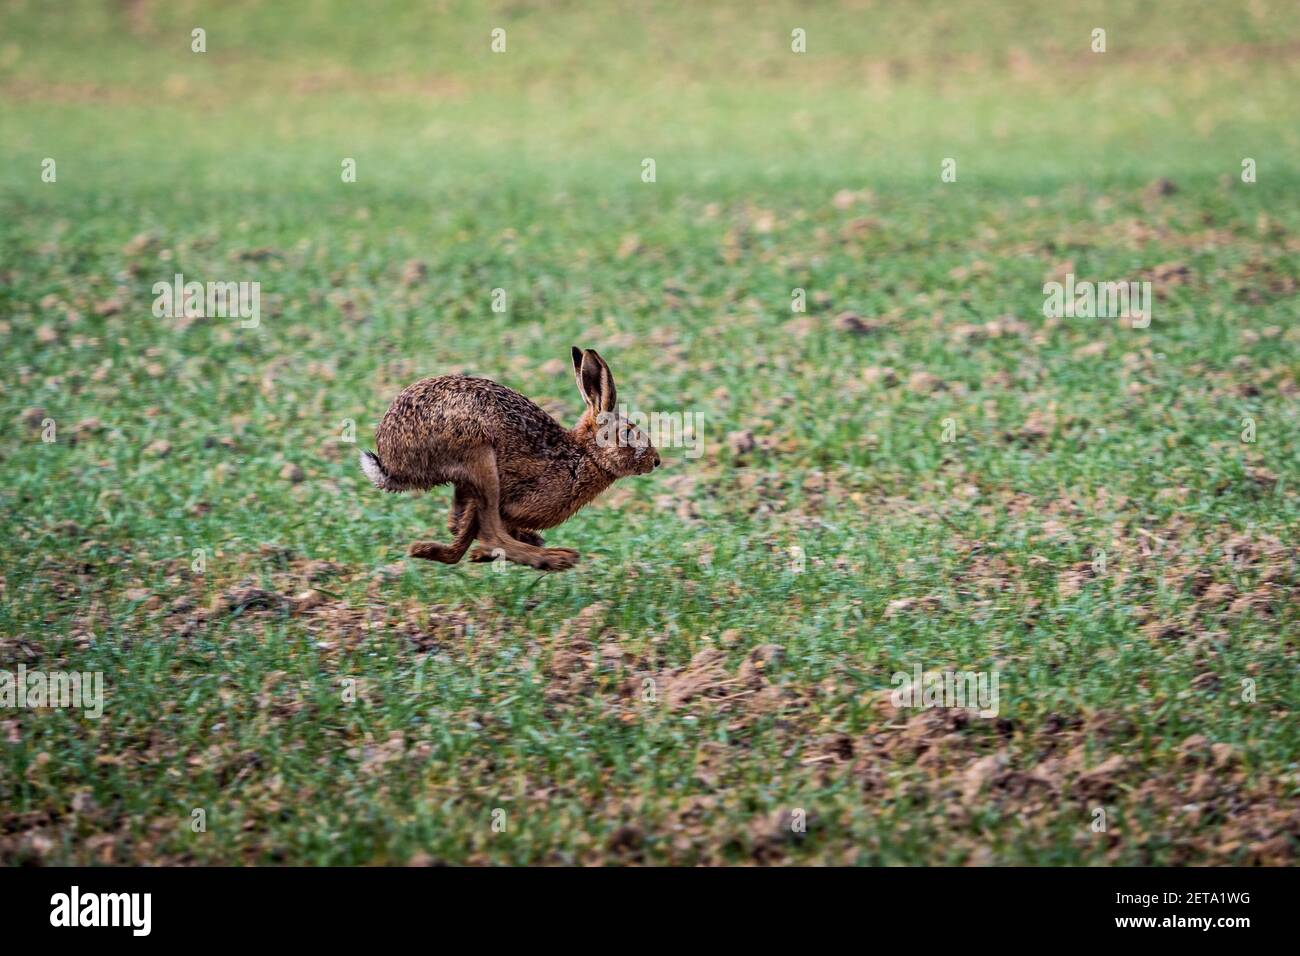 Running Hare - European Hare running across a field in Cambridgeshire Southern England. Brown Hare running. Lepus europaeus. Stock Photo